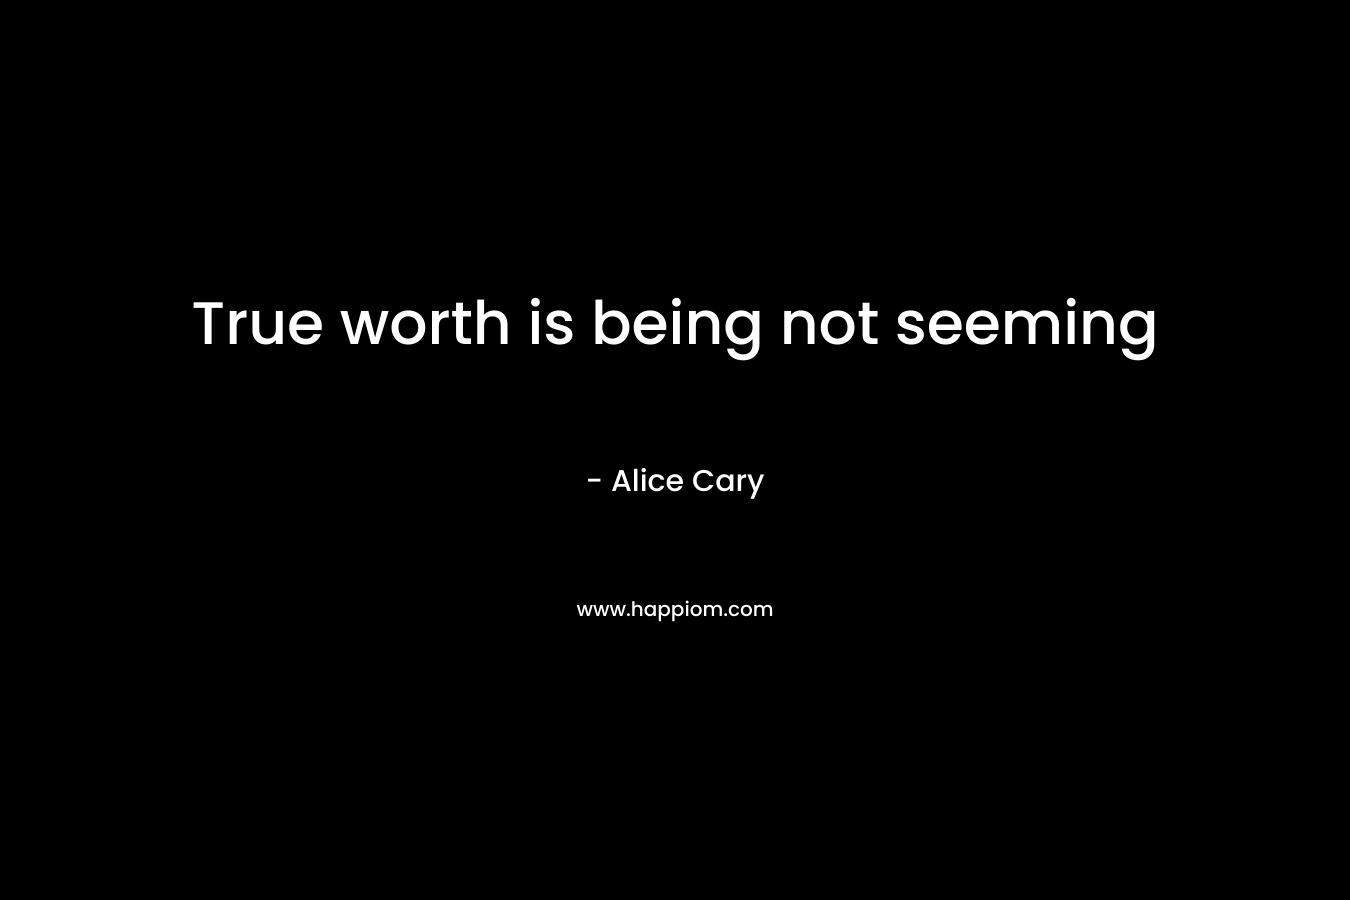 True worth is being not seeming – Alice Cary